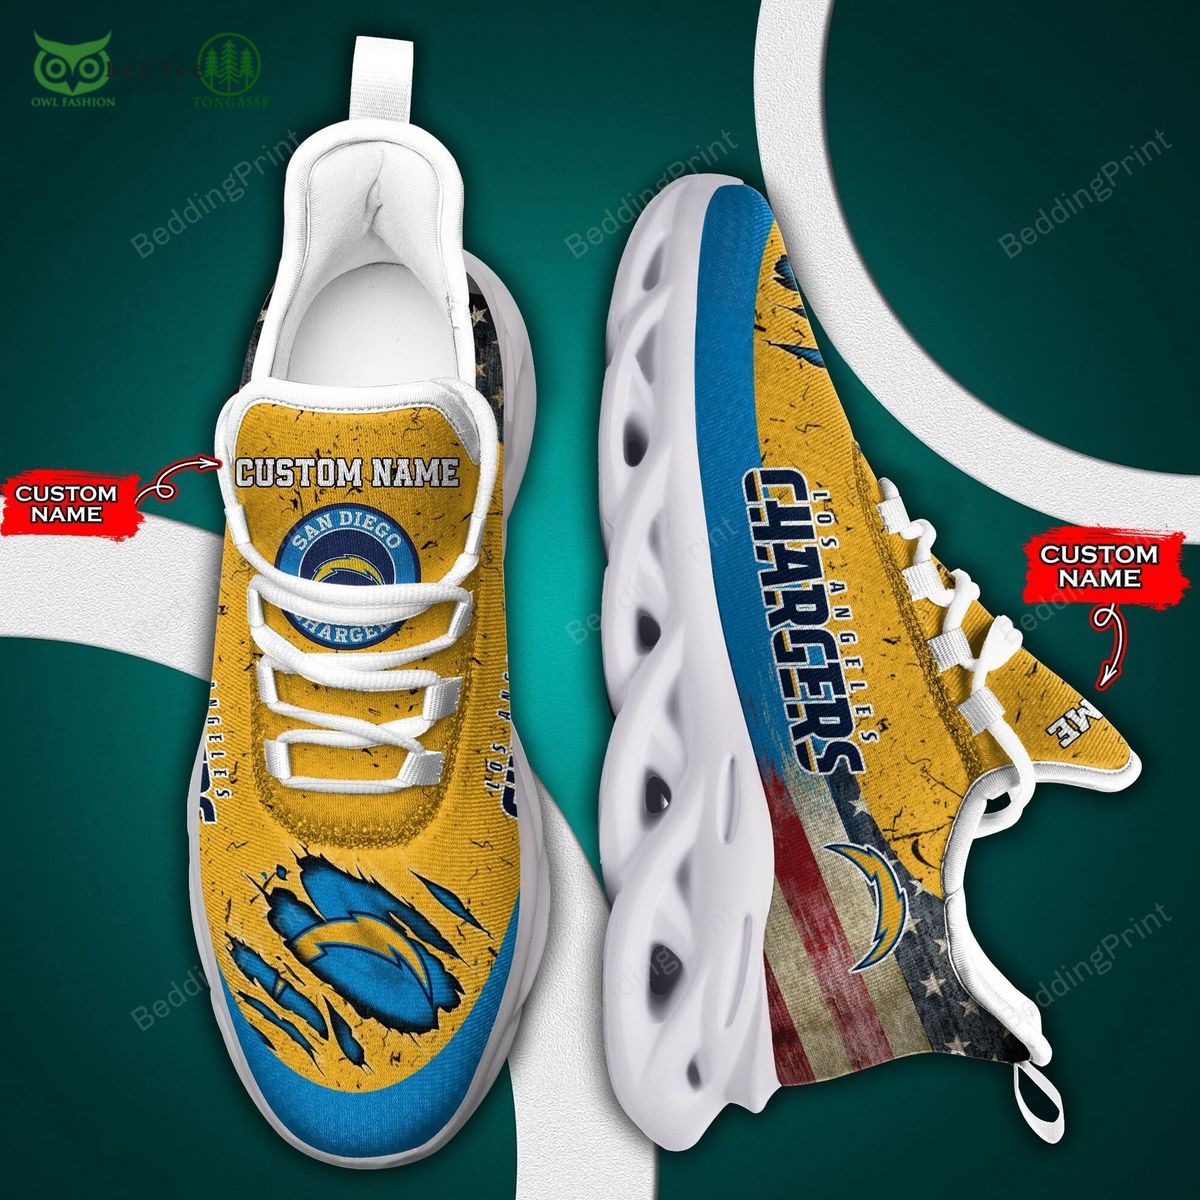 los angeles chargers nfl premium personalized max soul shoes 1 Yv05w